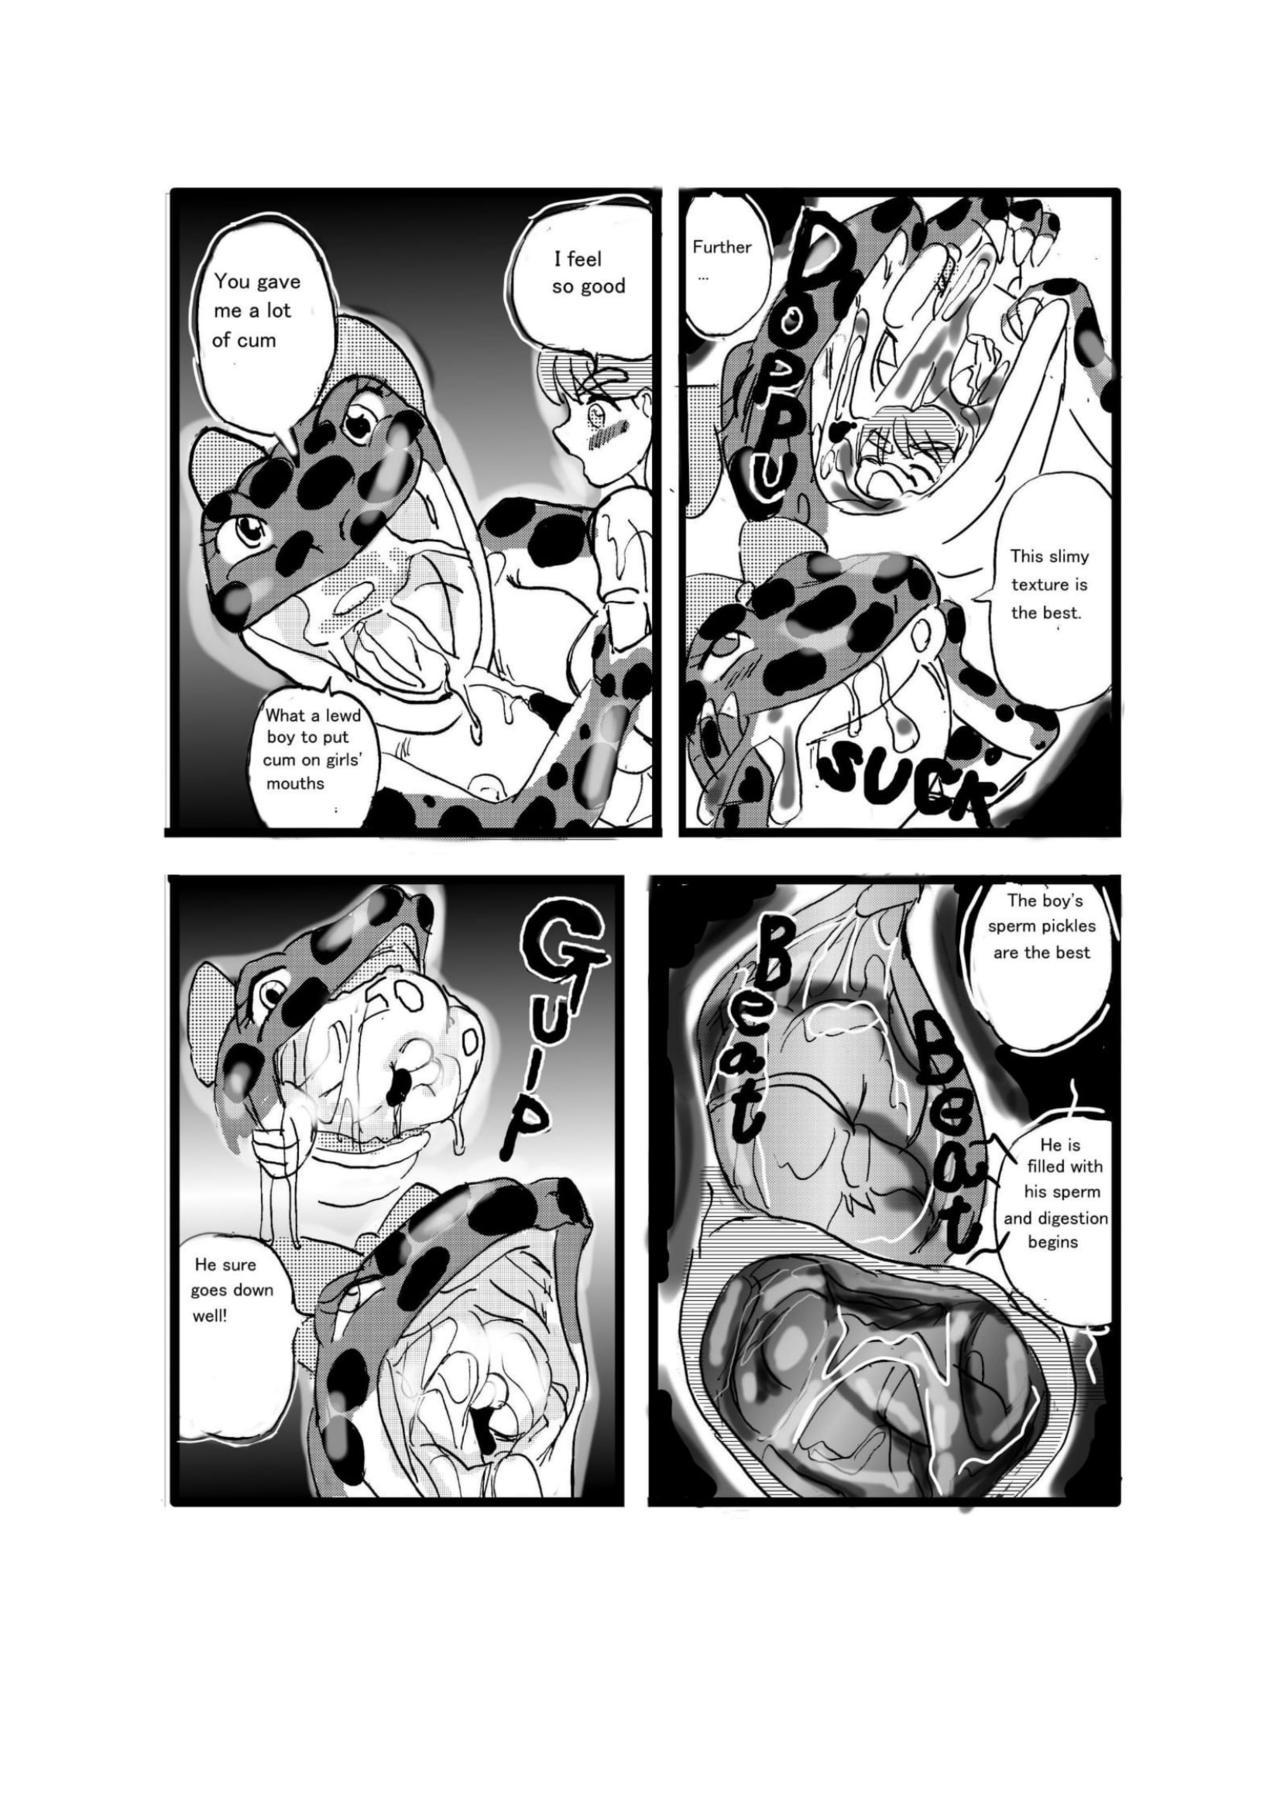 Ass Fetish Swallowed Whole vol.2 Waniko + What's Digestion? - Original Lips - Page 8